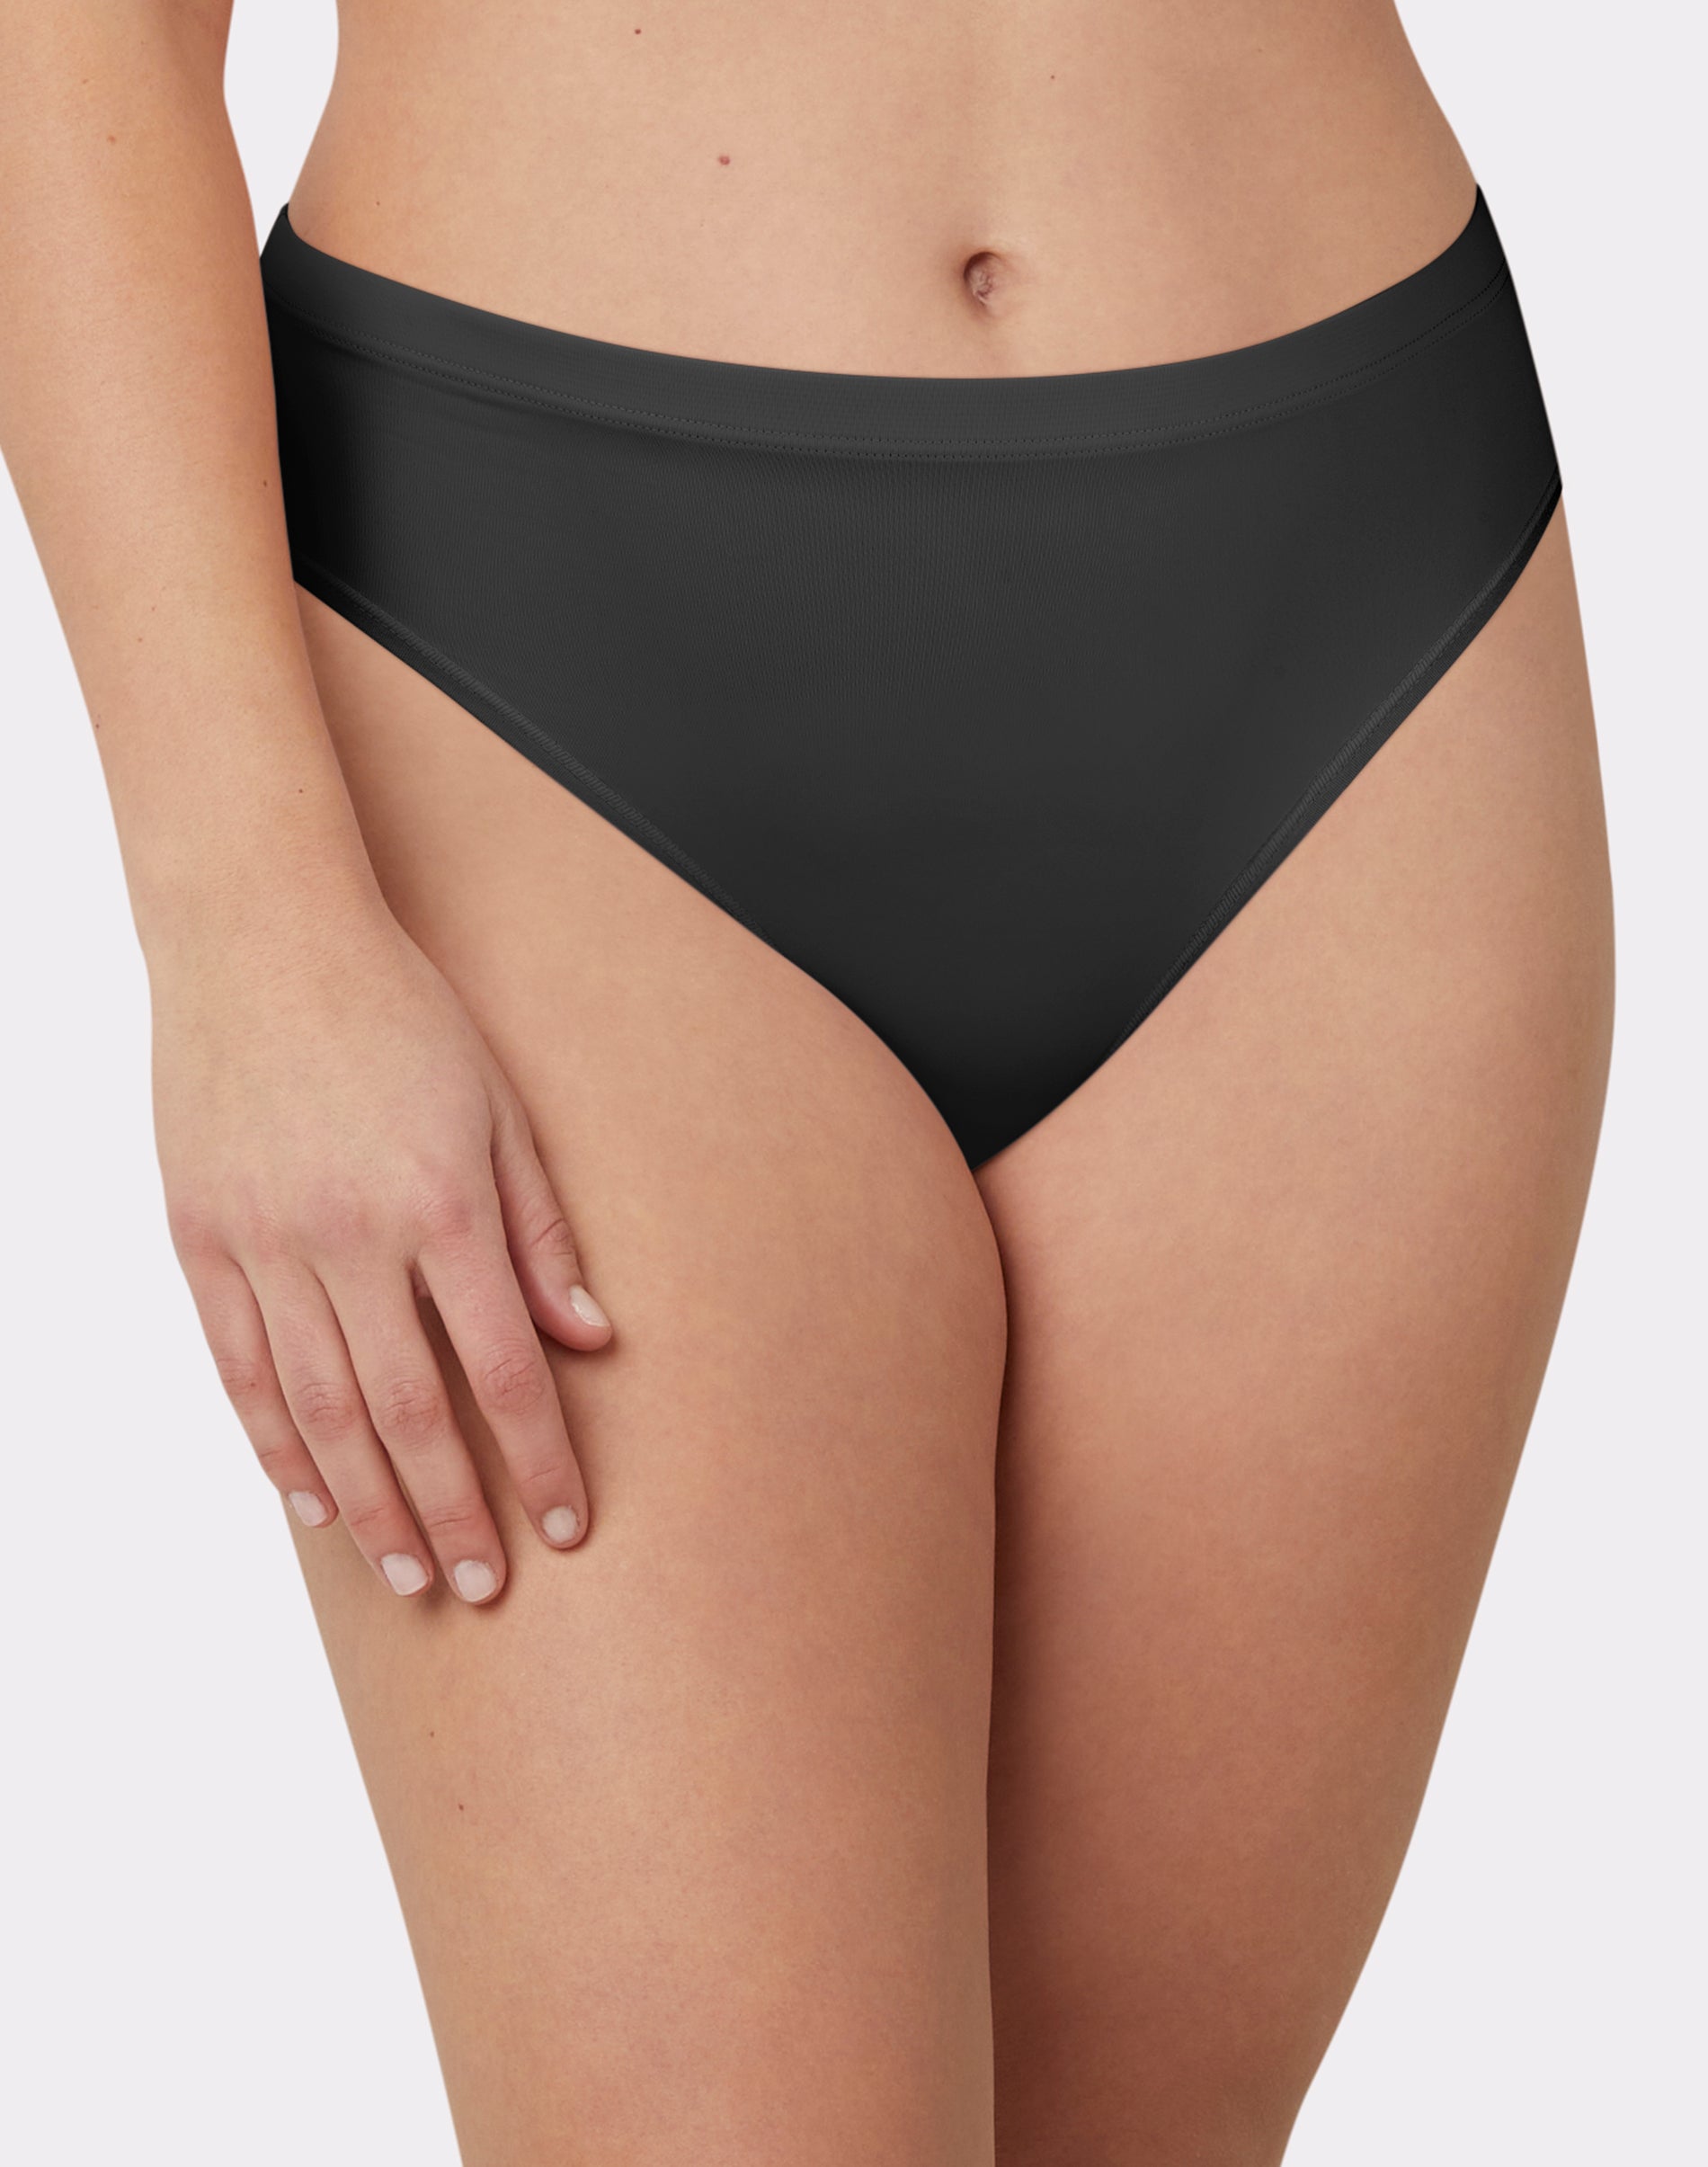 Maidenform Womens Barely There® Hi-Leg Panty - Apparel Direct Distributor